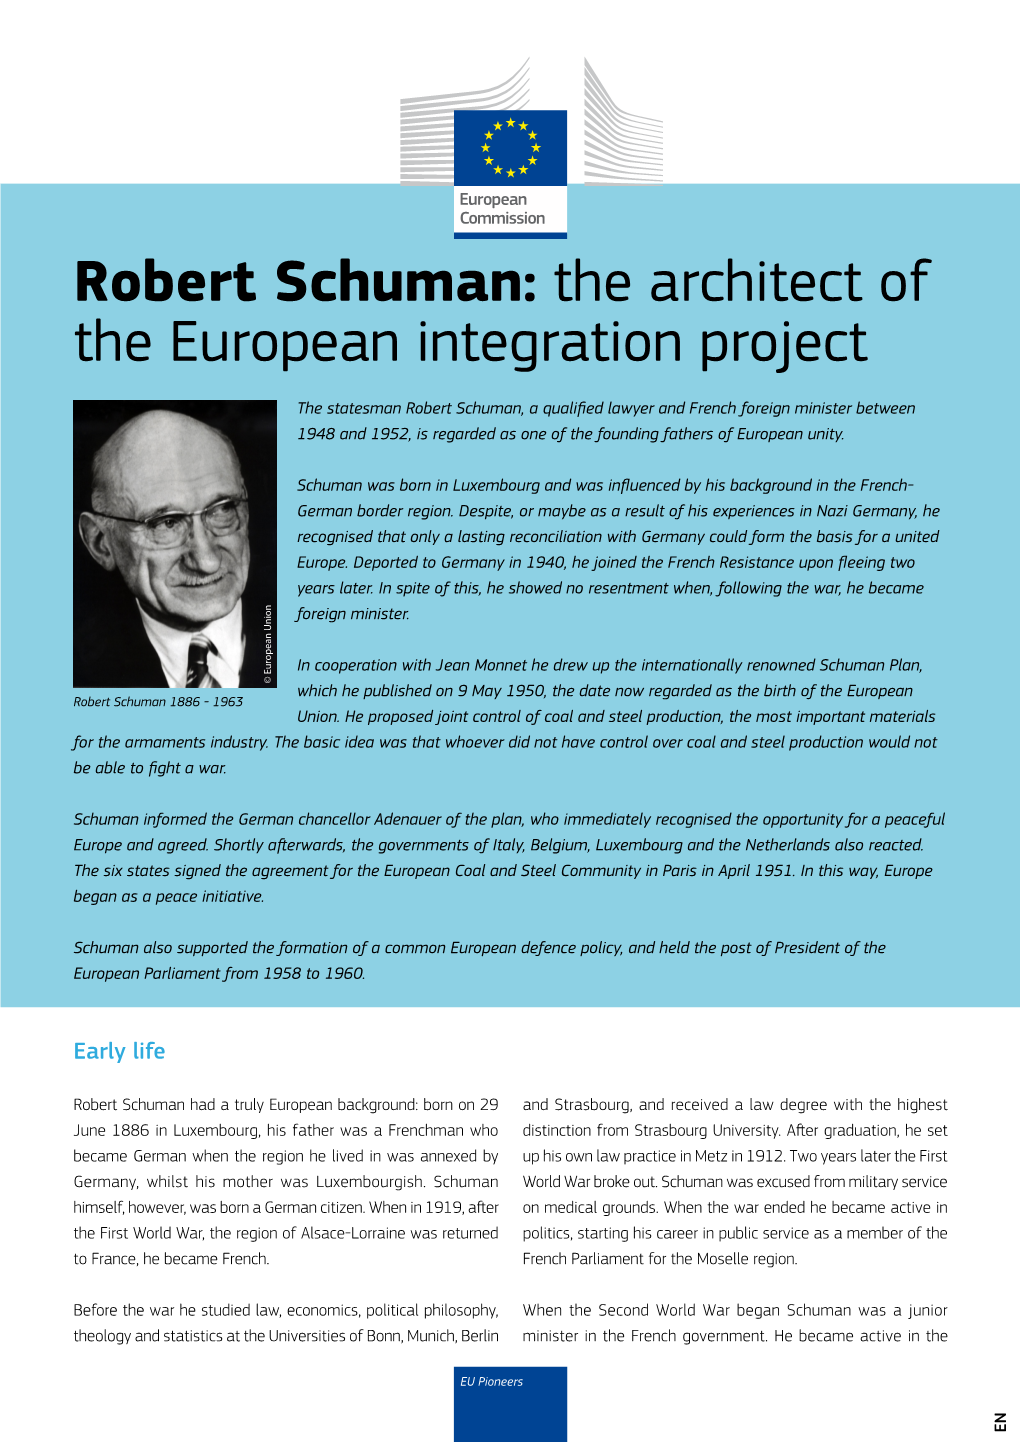 Robert Schuman: the Architect of the European Integration Project